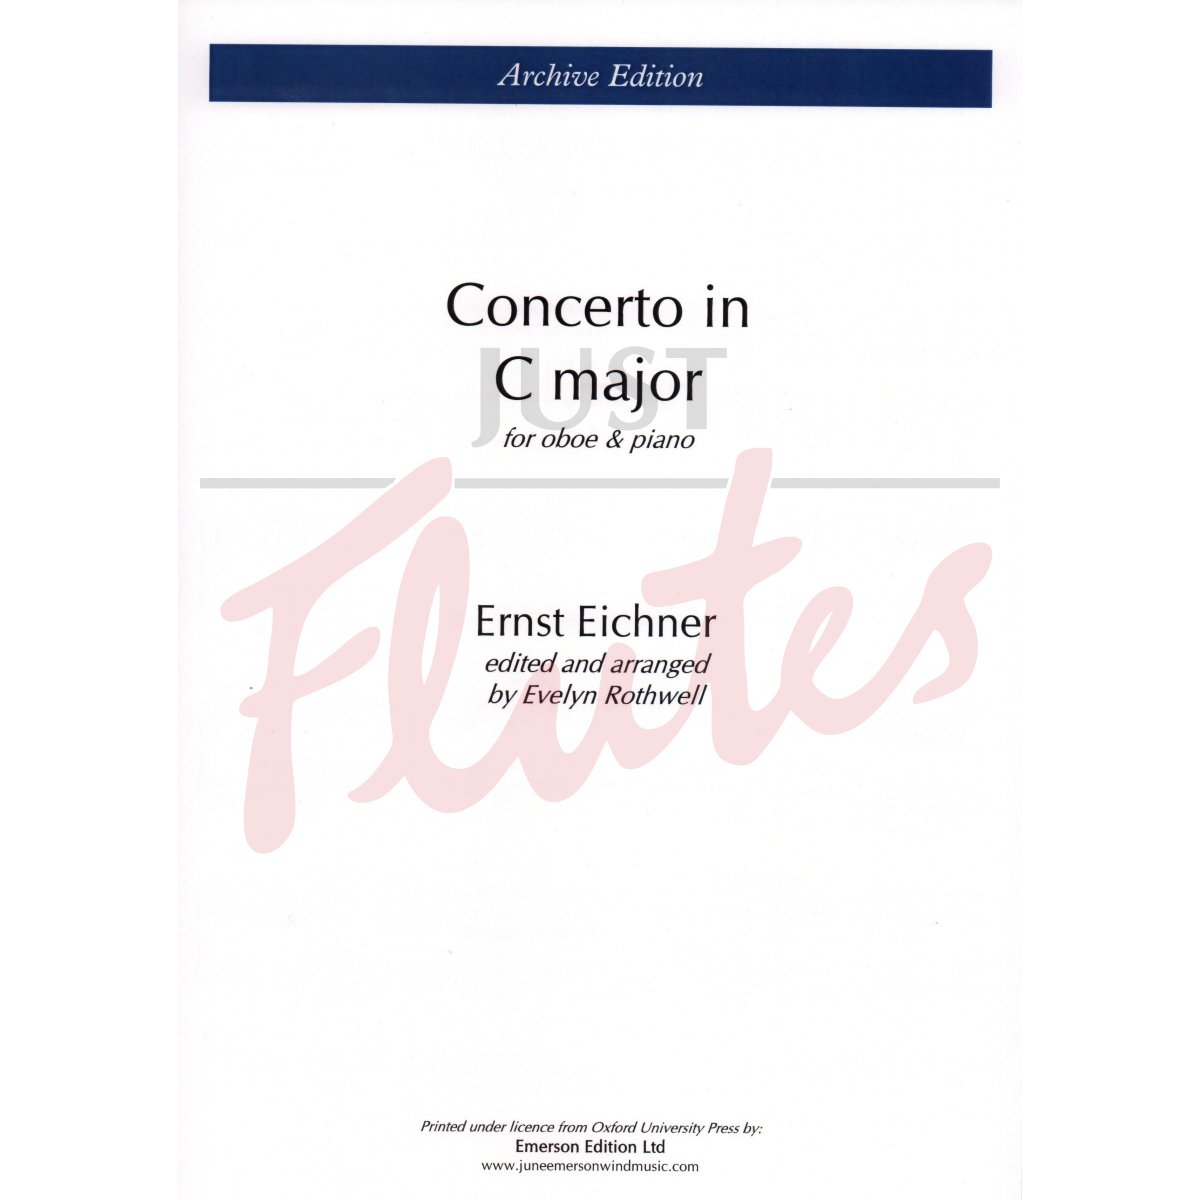 Concerto in C major for Oboe and Piano